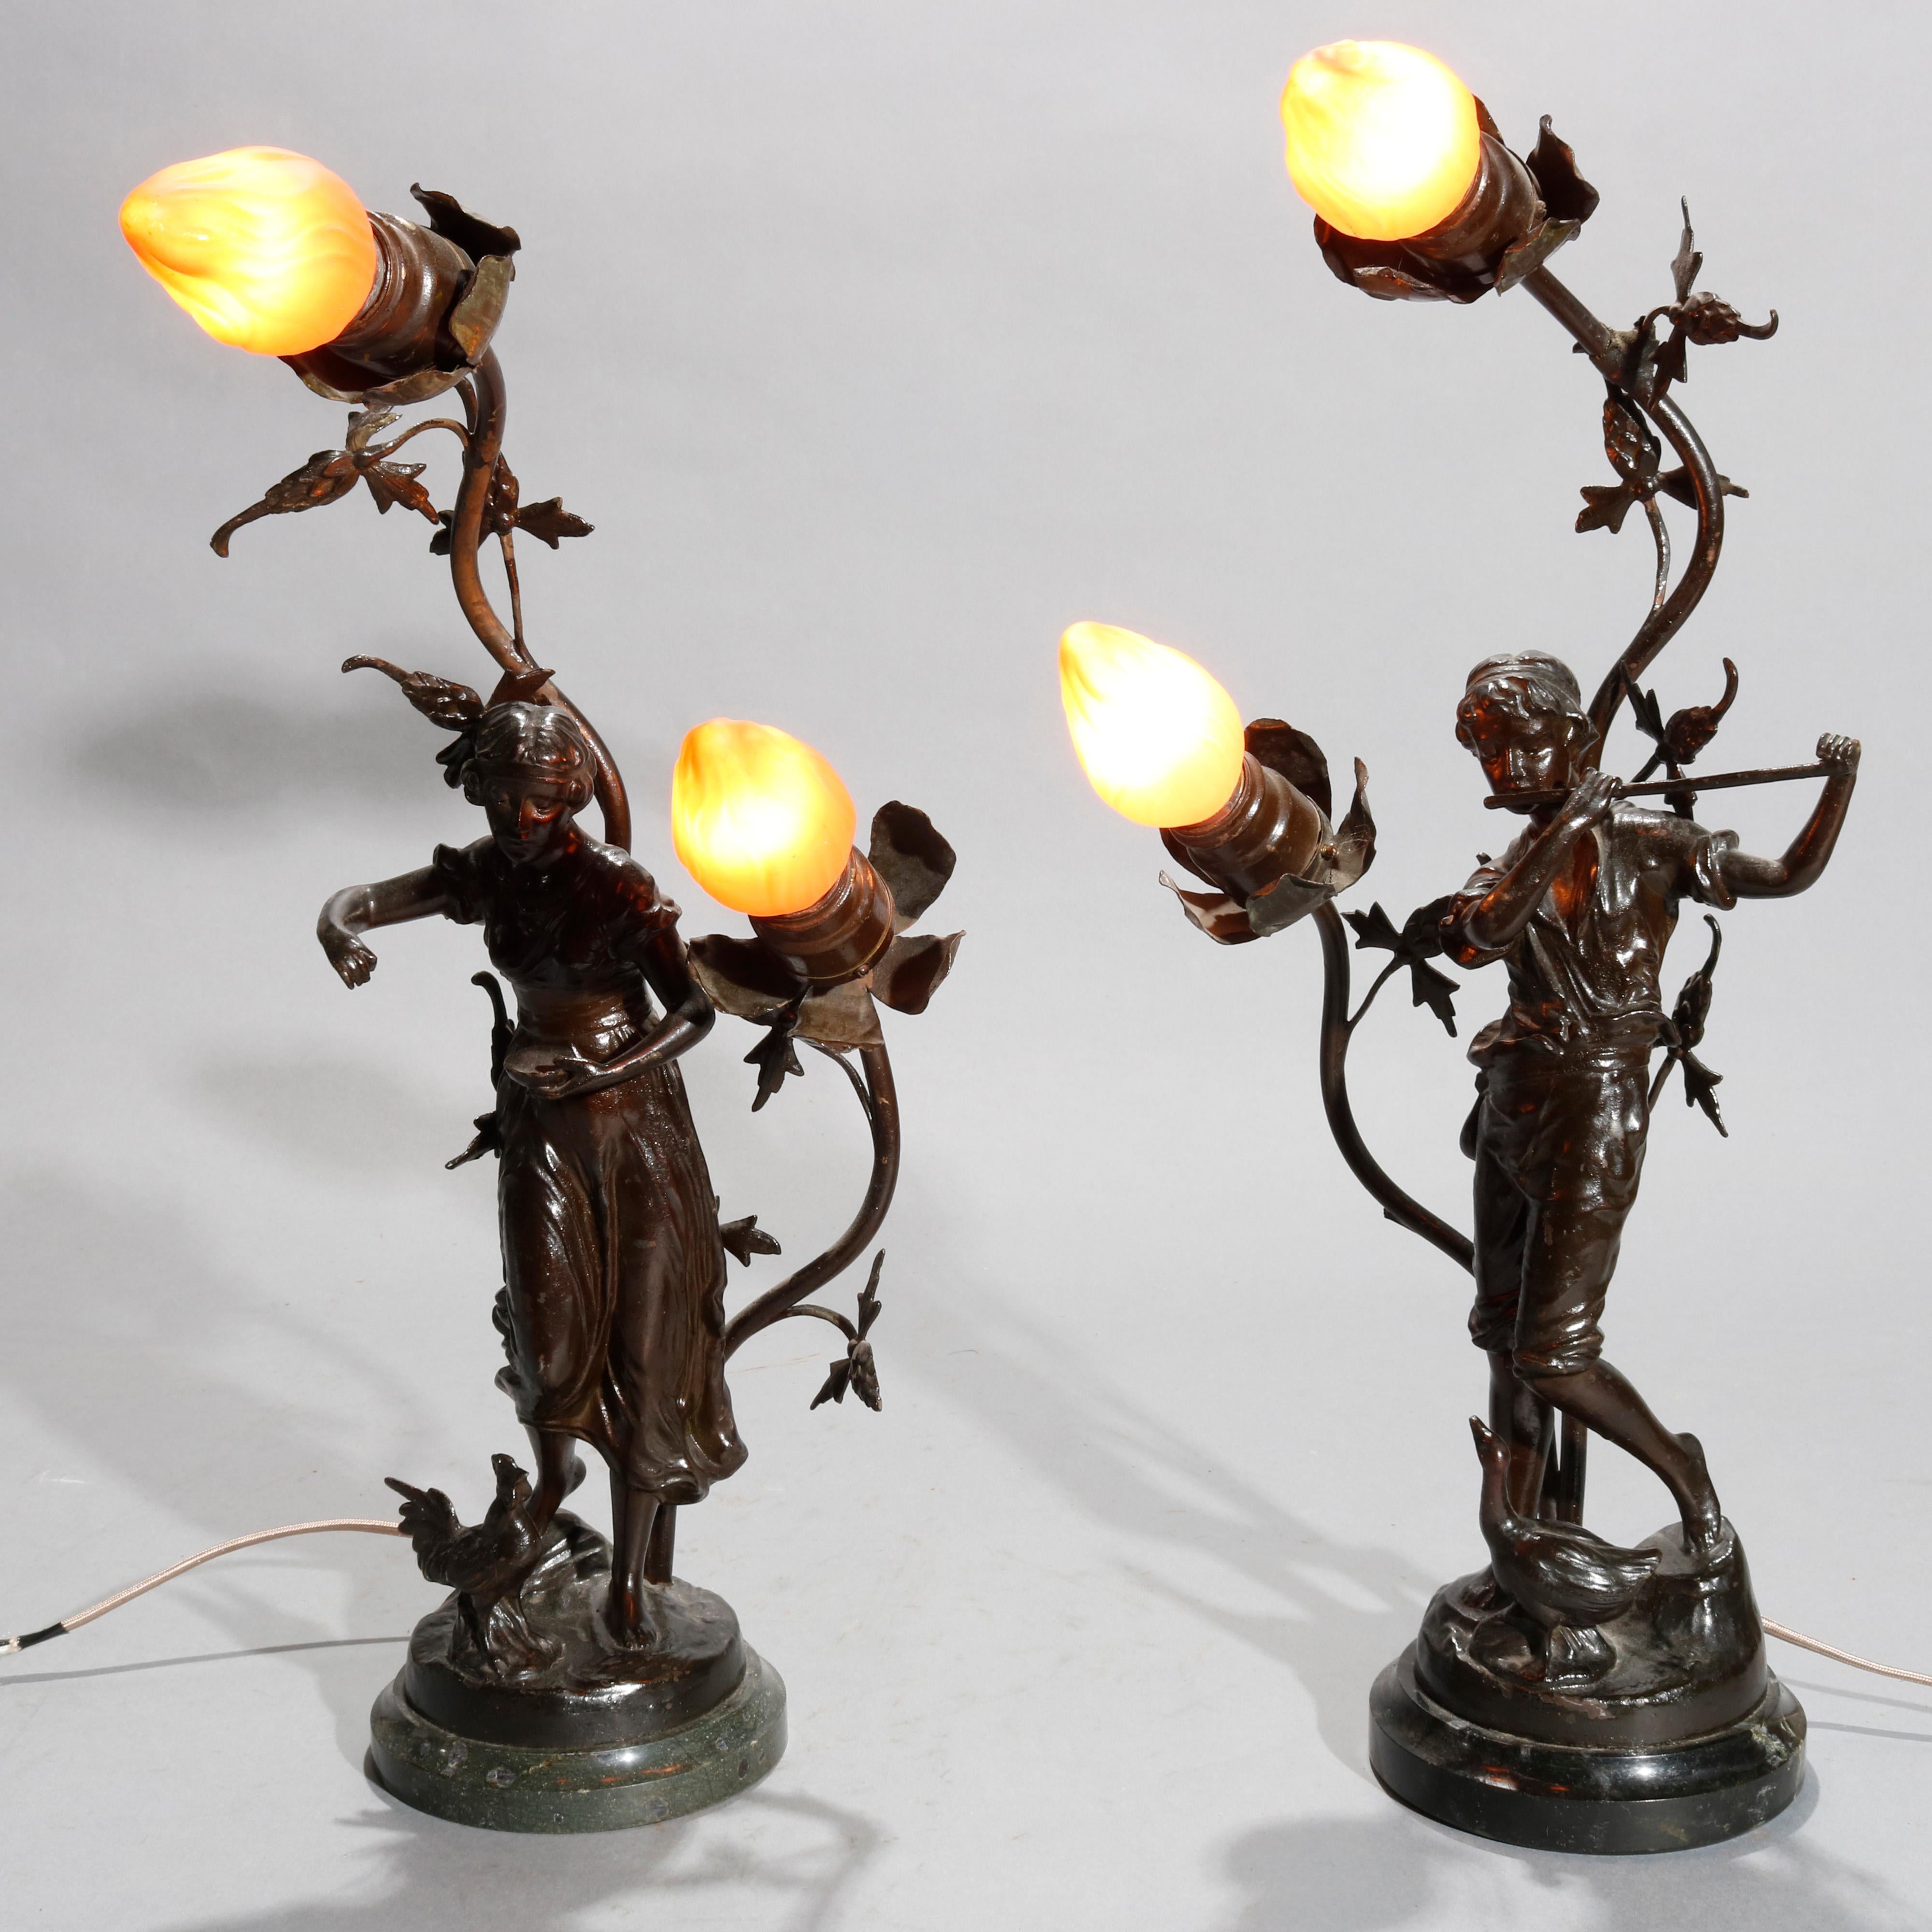 An antique pair of French figurative Newel post lamps offer bronzed metal construction with dancing muses beneath foliate form arms terminating in floral form lights, circa 1900
Antique pair of French bronzed metal figural Newel post lamps, circa